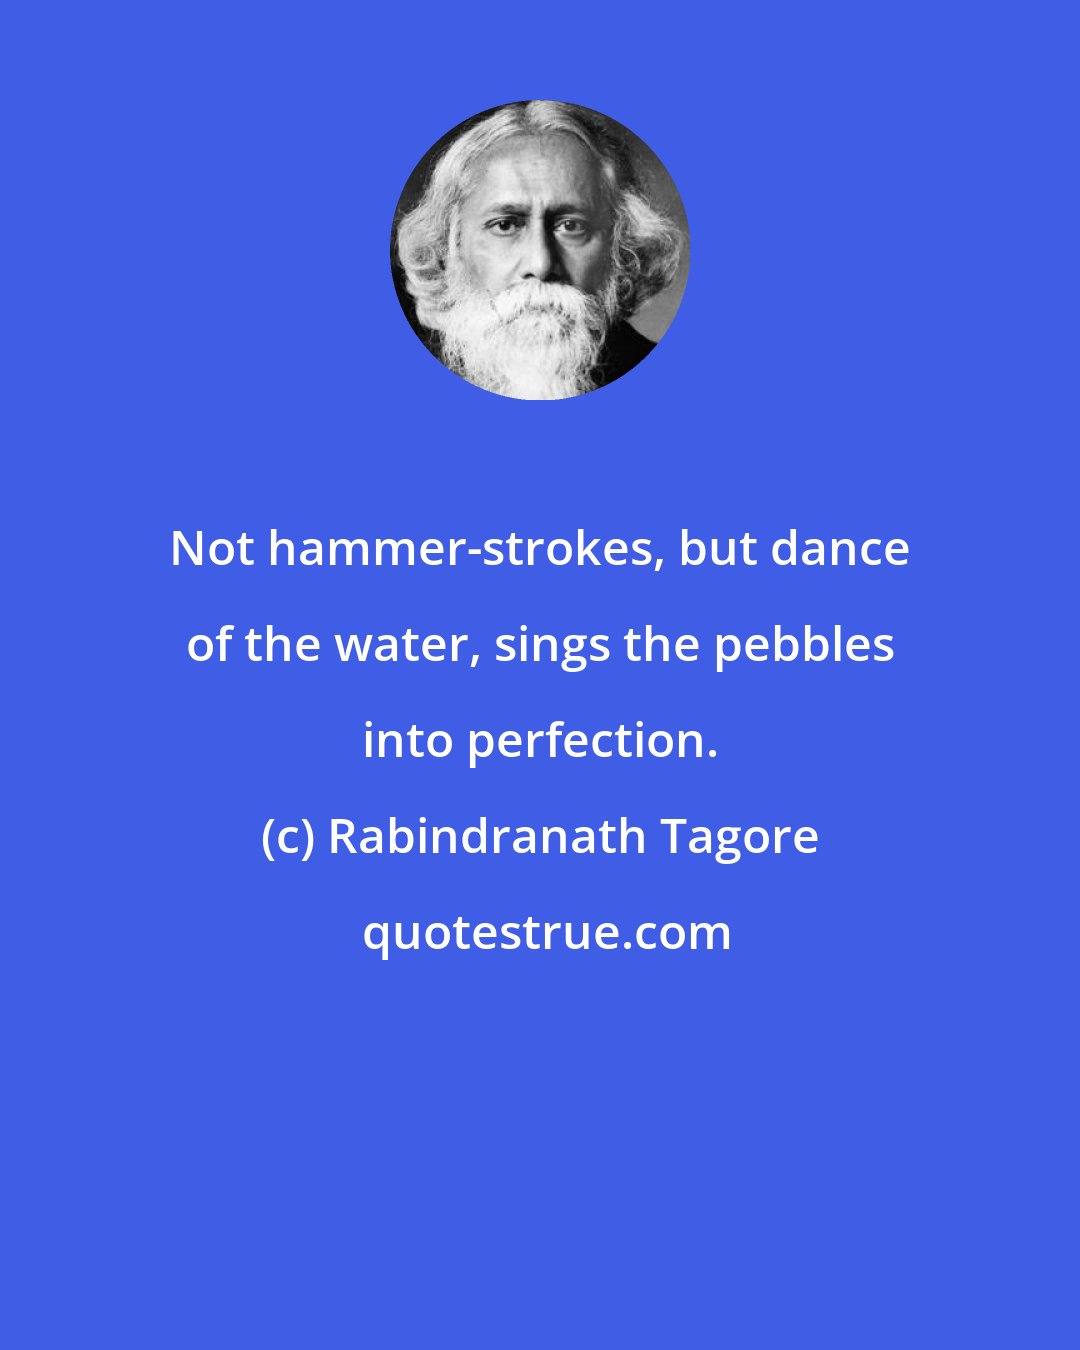 Rabindranath Tagore: Not hammer-strokes, but dance of the water, sings the pebbles into perfection.